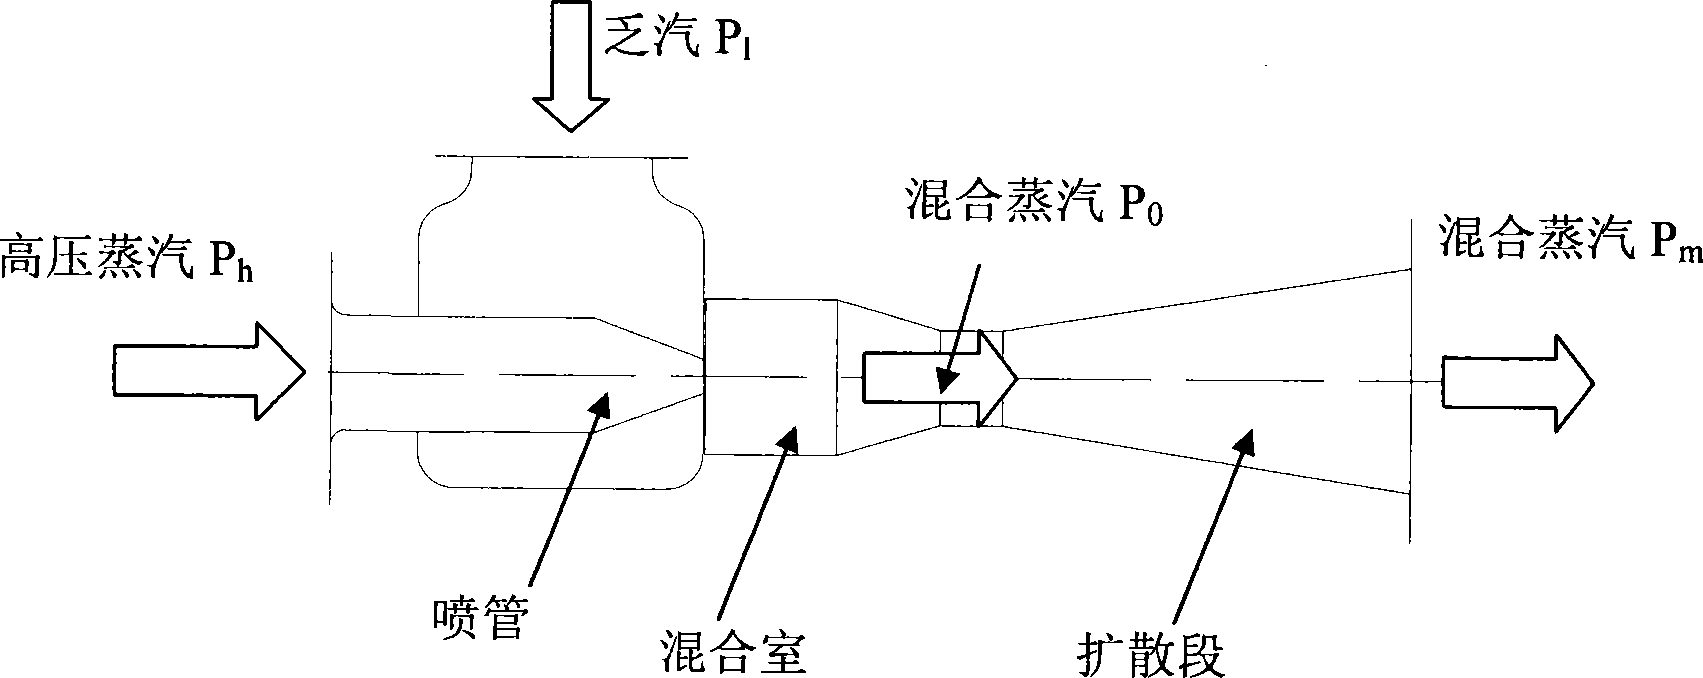 Steam jet type heat pump heat distribution system for recovering thermal power plant condensing residual heat